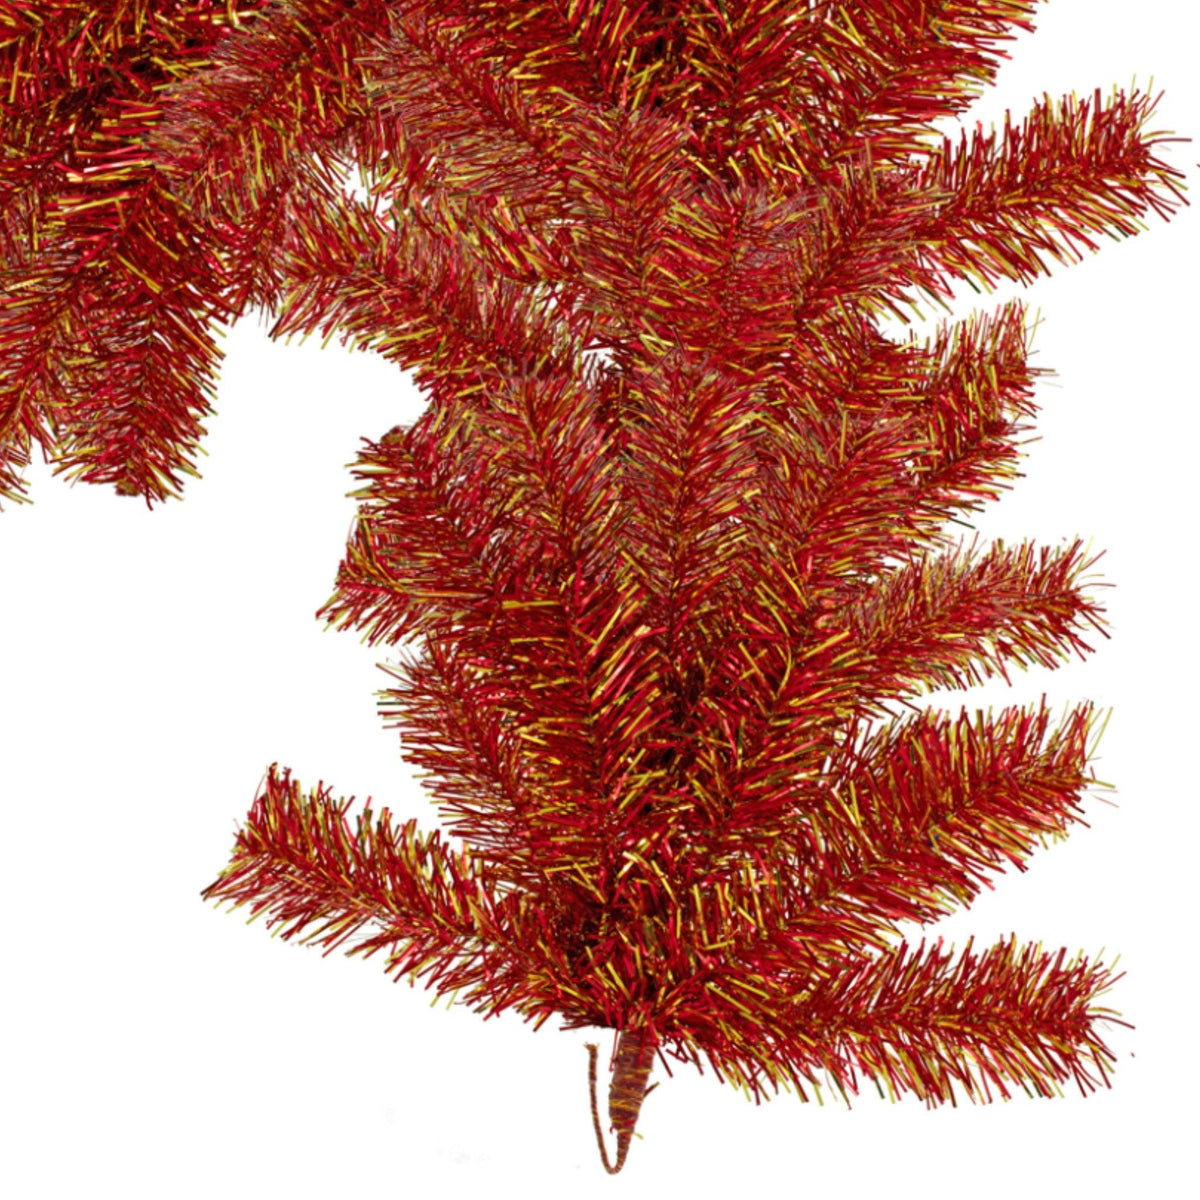 Shop for Lee Display's brand new 6FT Shiny Metallic Red and Gold Tinsel Brush Garlands on sale now at leedisplay.com.  Made on a bendable wire